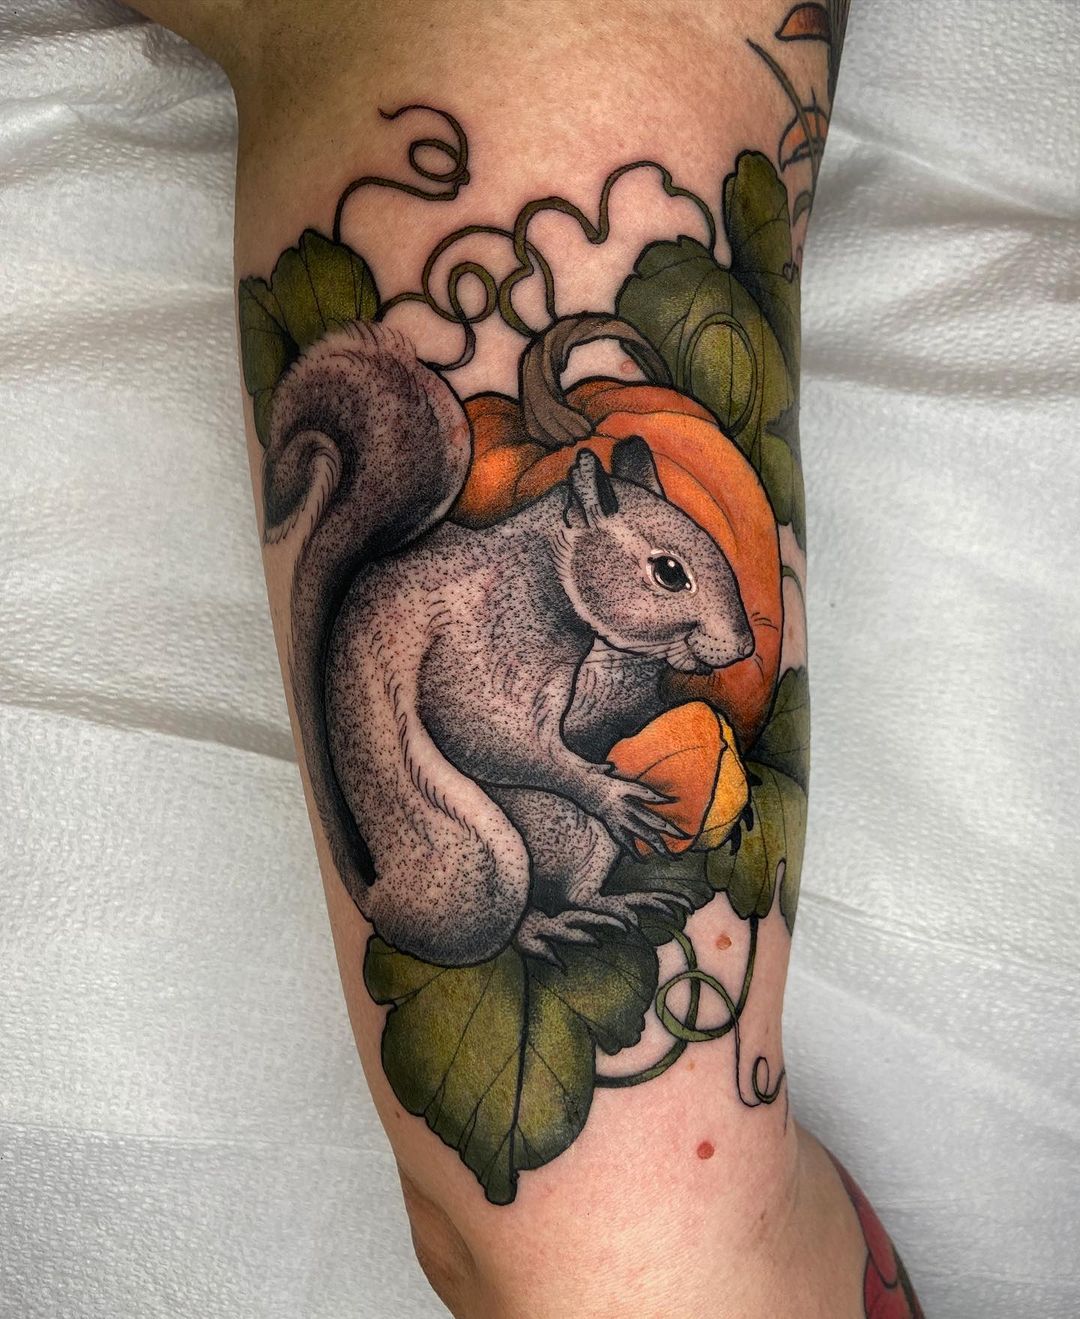 Squirrel tattoo by attackofthe50footwoman